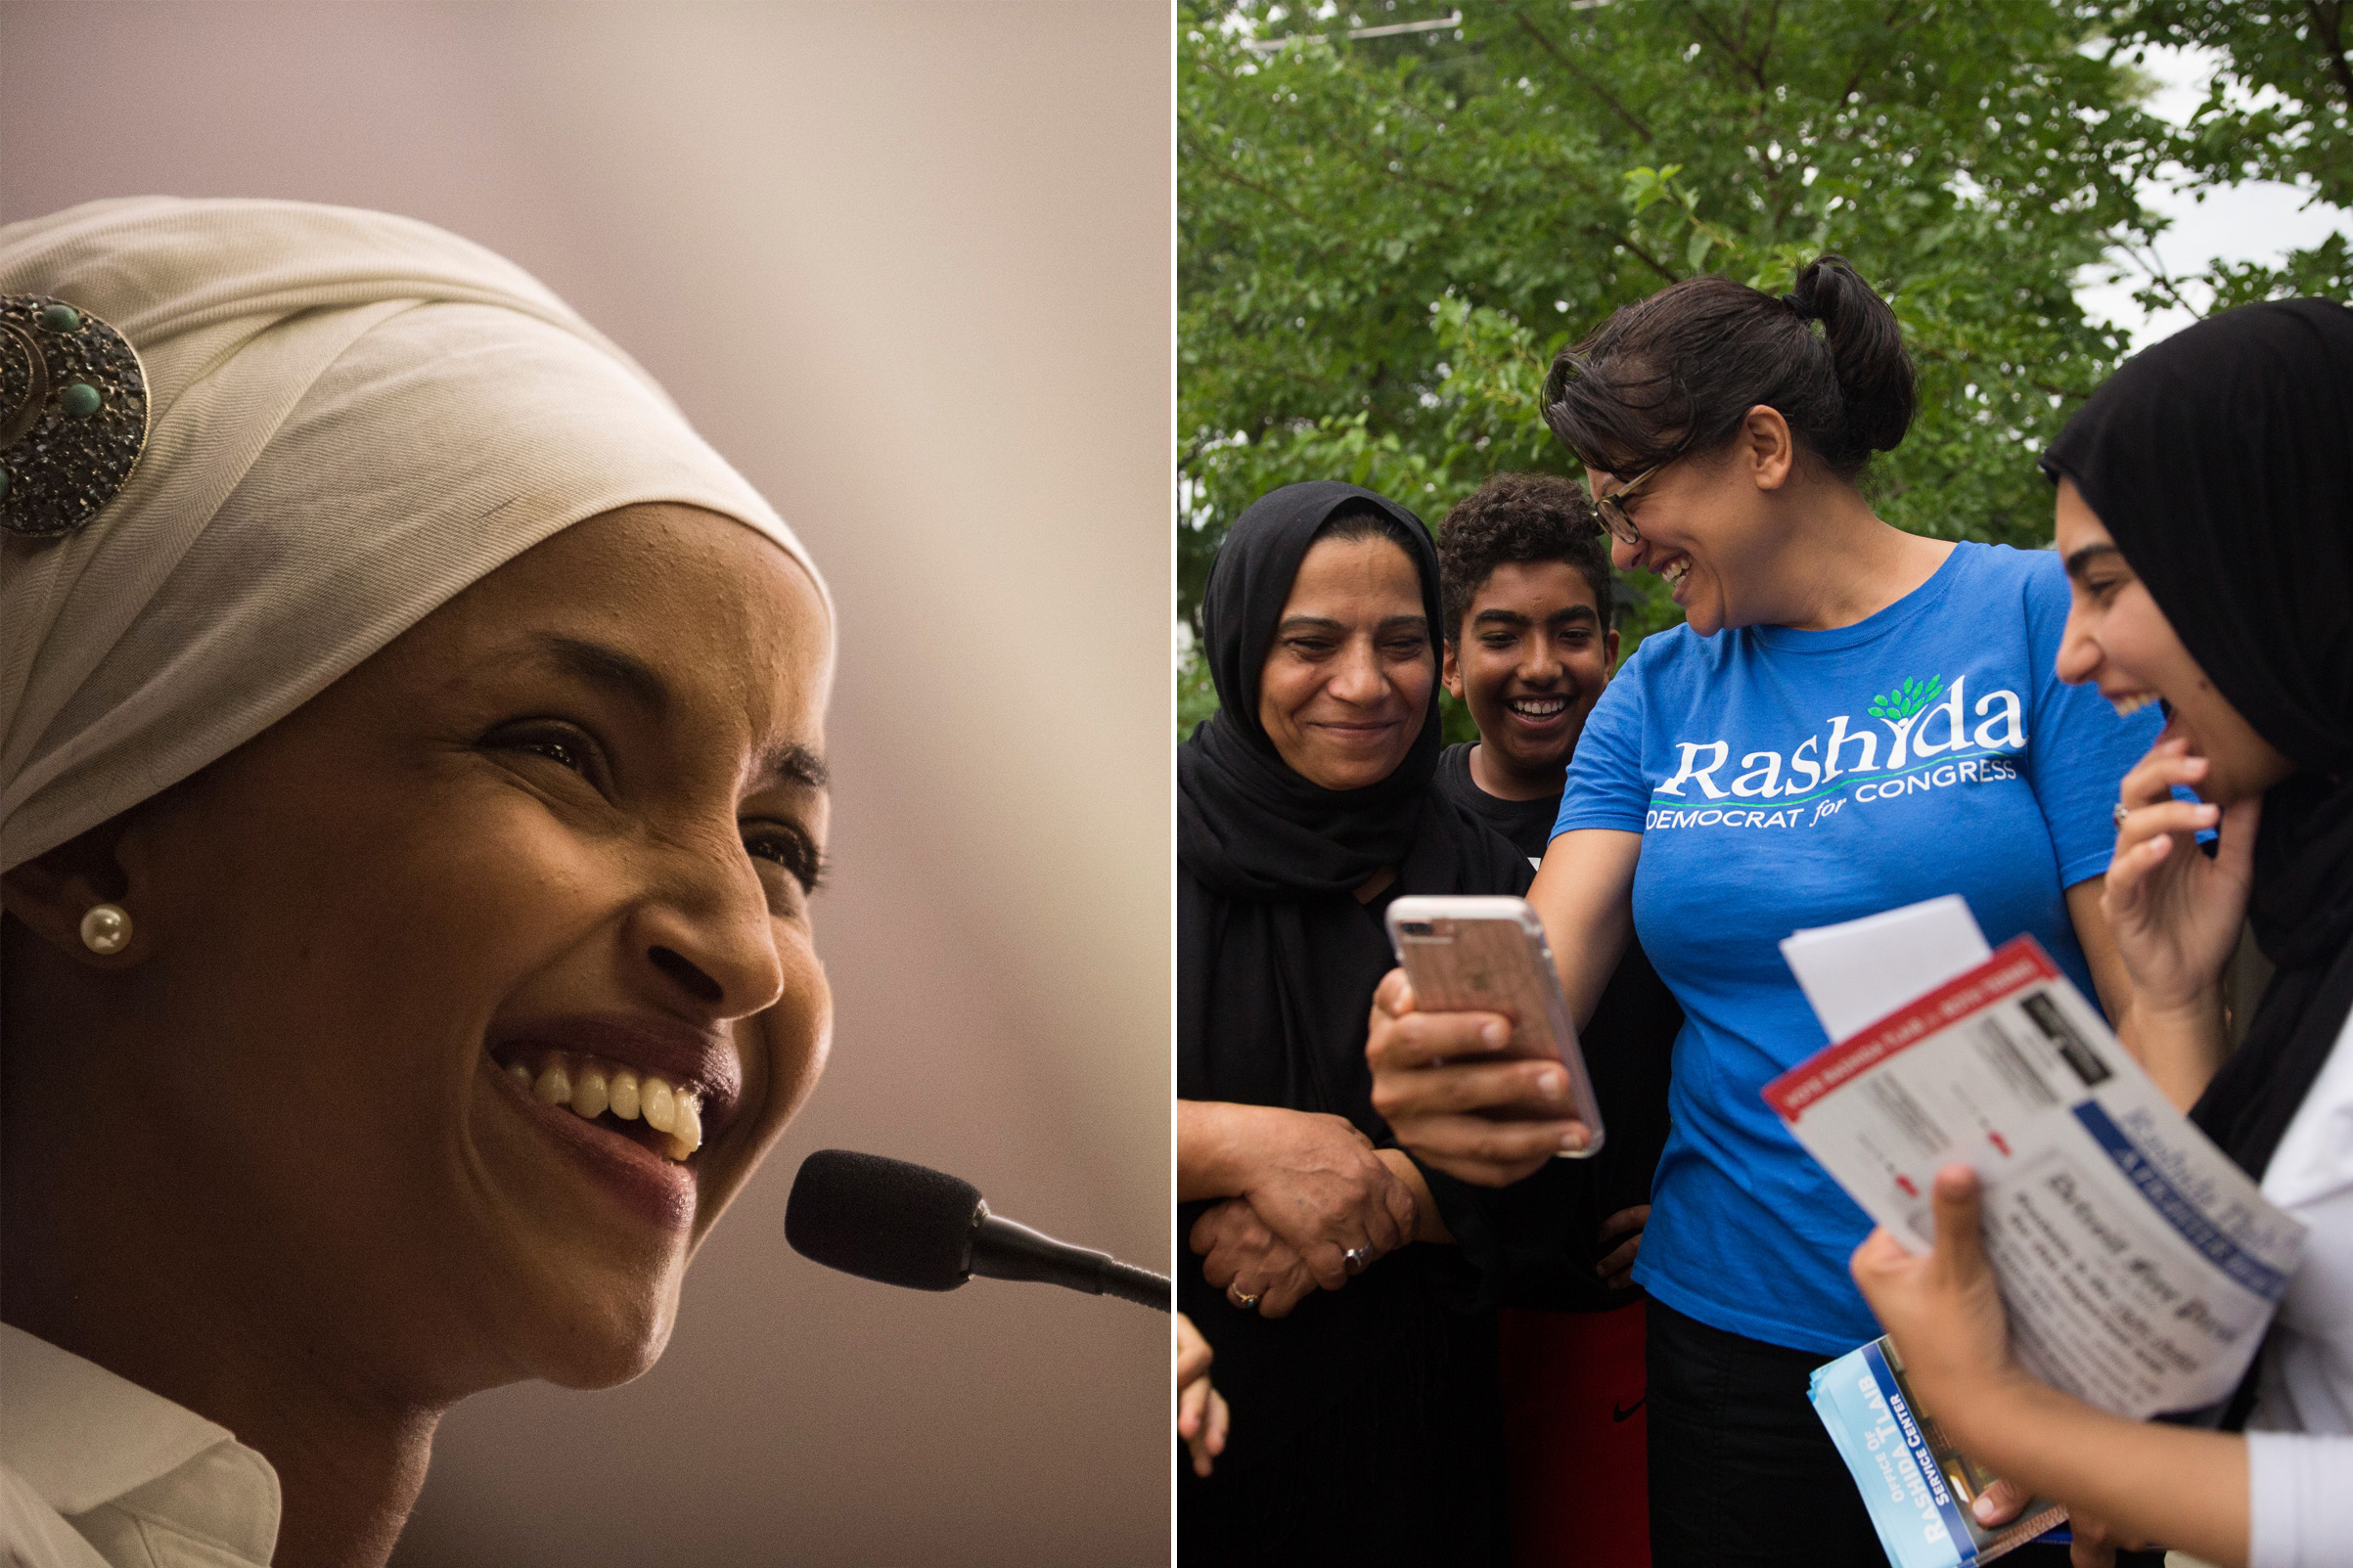 Ilhan Omar, a candidate for State Representative for District 60B in Minnesota, gives an acceptance speech on election night, November 8, 2016 in Minneapolis, Minnesota. Omar, a refugee from Somalia, is the first Somali-American Muslim woman to hold public office; Rashida Tlaib shares a moment with her supporters on the campaign trail. (Omar: Stephen Maturen—AFP/Getty Images; Tlaib: Erik Paul Howard)